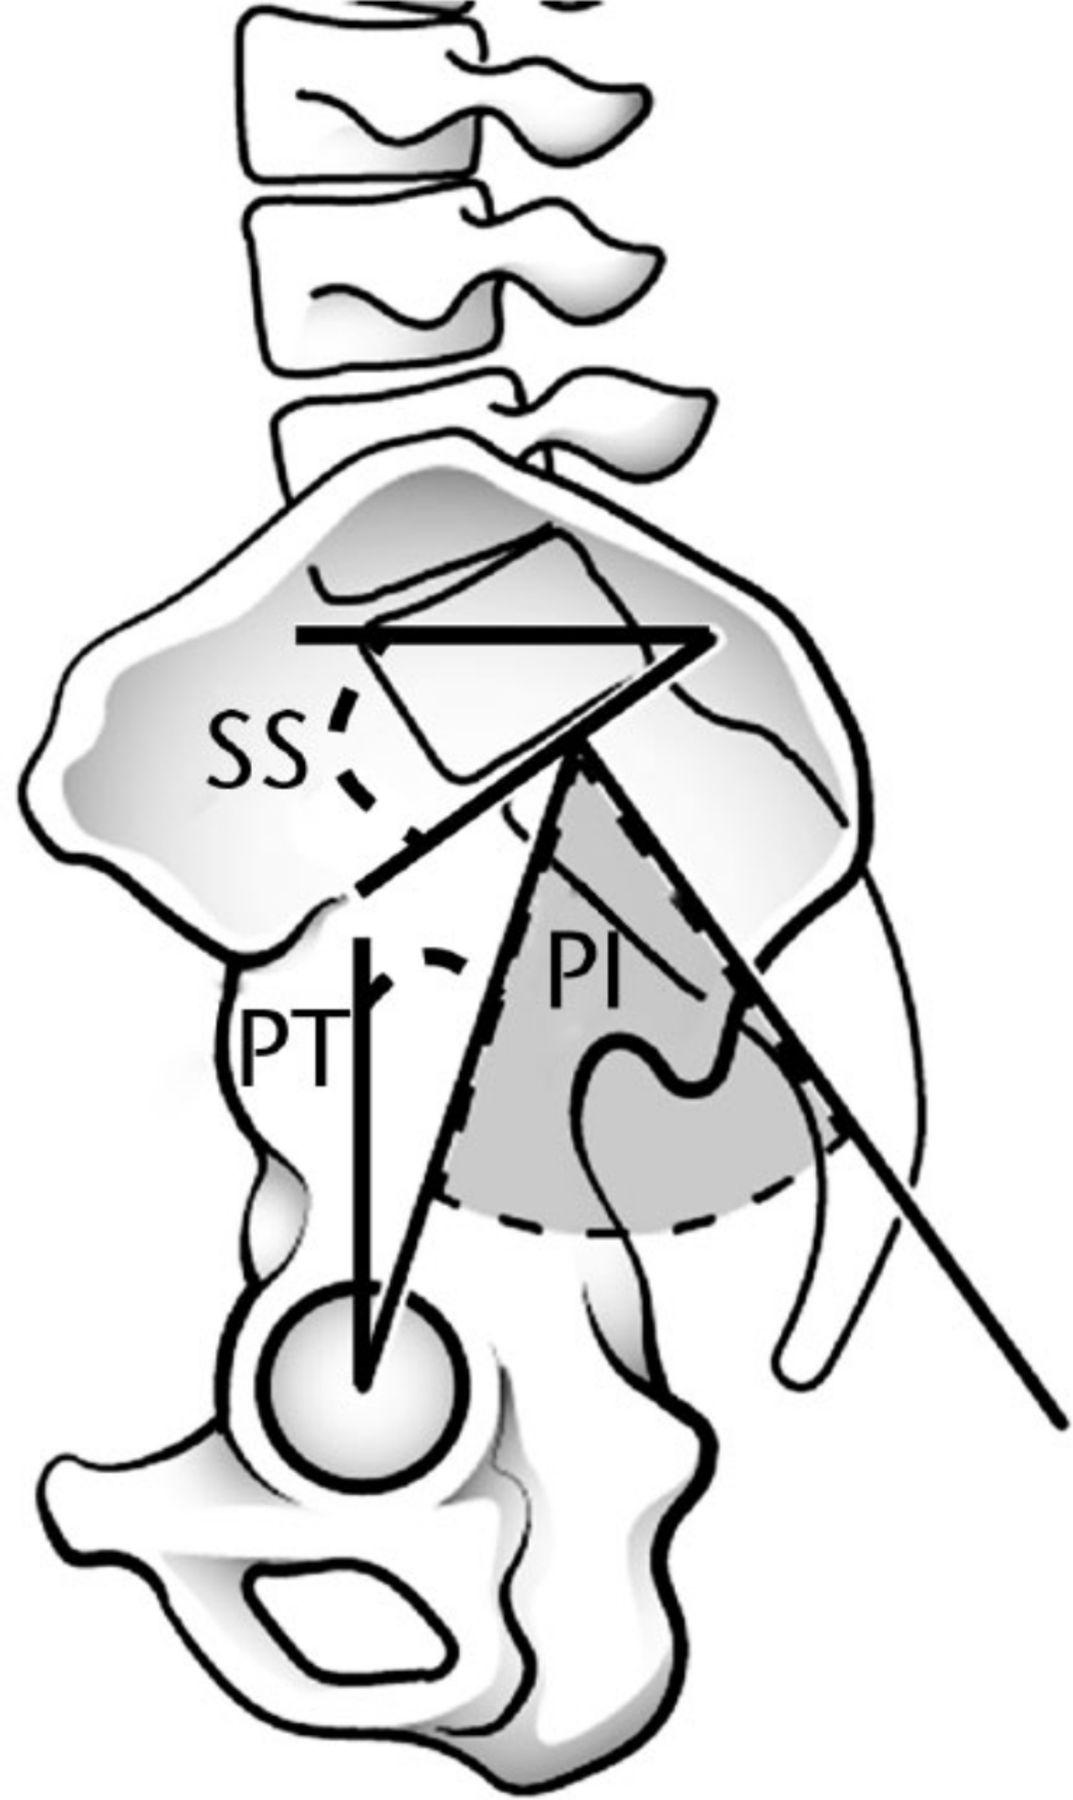 Fig. 1 
          Illustration of a lateral view of the pelvis and lumbar spine demonstrating the non-positional sacropelvic parameter, pelvic incidence (PI), and its positional components, sacral slope (SS) and pelvic tilt (PT). PI is defined as the angle formed between the line perpendicular to the sacral plate at its midpoint and the line connecting this point to the axis of the femoral heads. PT is defined as the angle between the vertical and the line connecting the midpoint of the sacral plate and the femoral axis. SS is defined as the angle between the superior plate of S1 and a horizontal line.
        